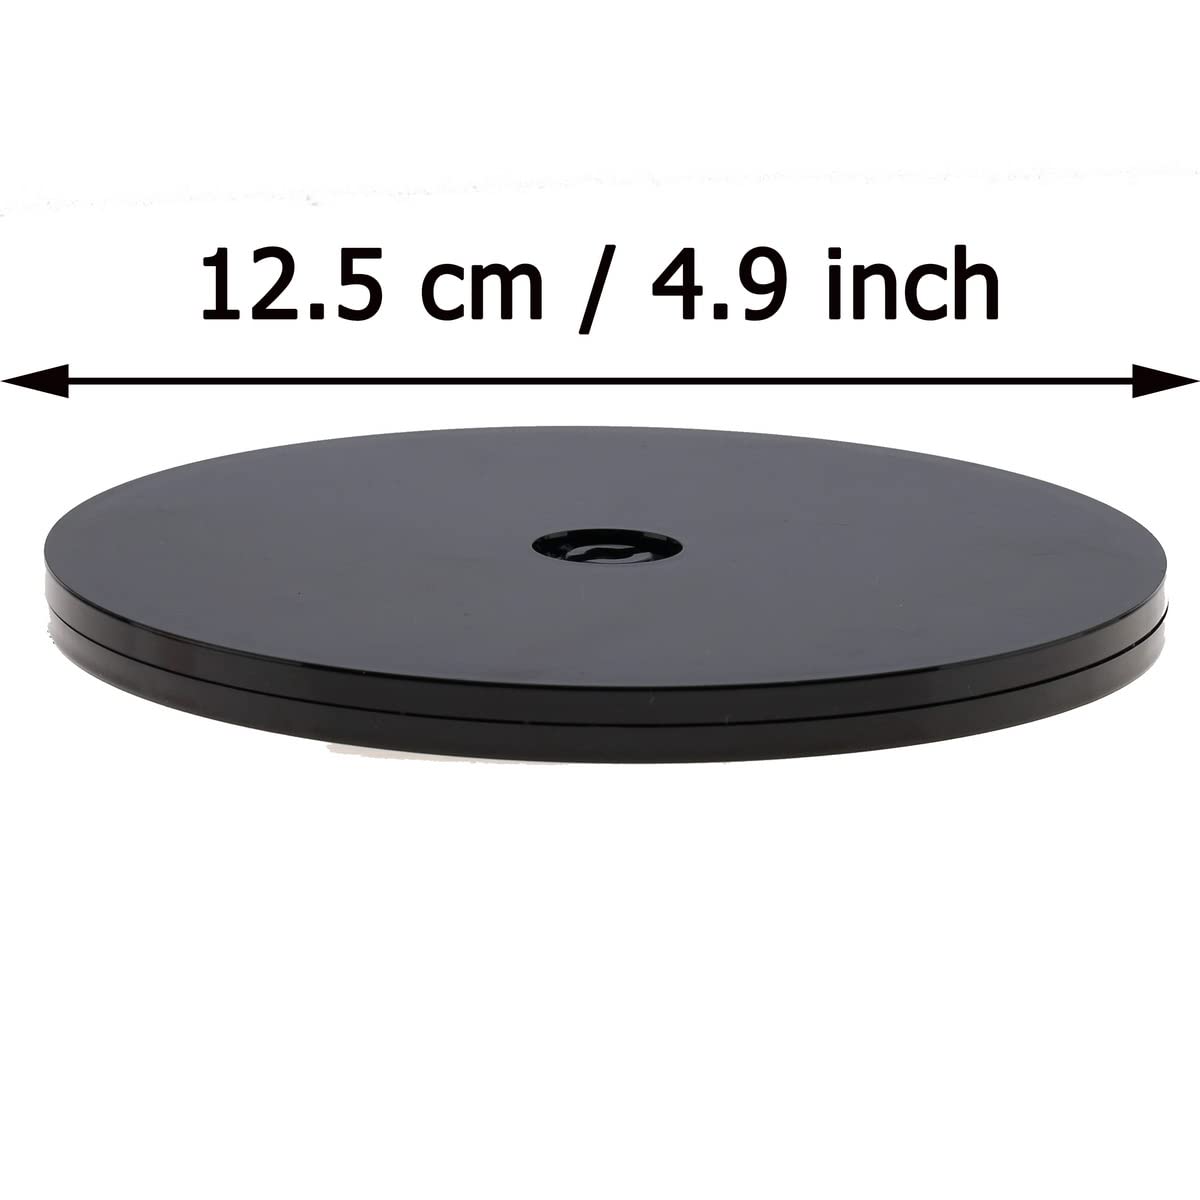 Meiwlong 4.9 Inch Lazy Susan Swivel Plastic Turntable Rotating Heavy Duty Stand for Organizer Bins Potted Plants Spice Cabinets Crafts Table Lamps Model Base Window Display